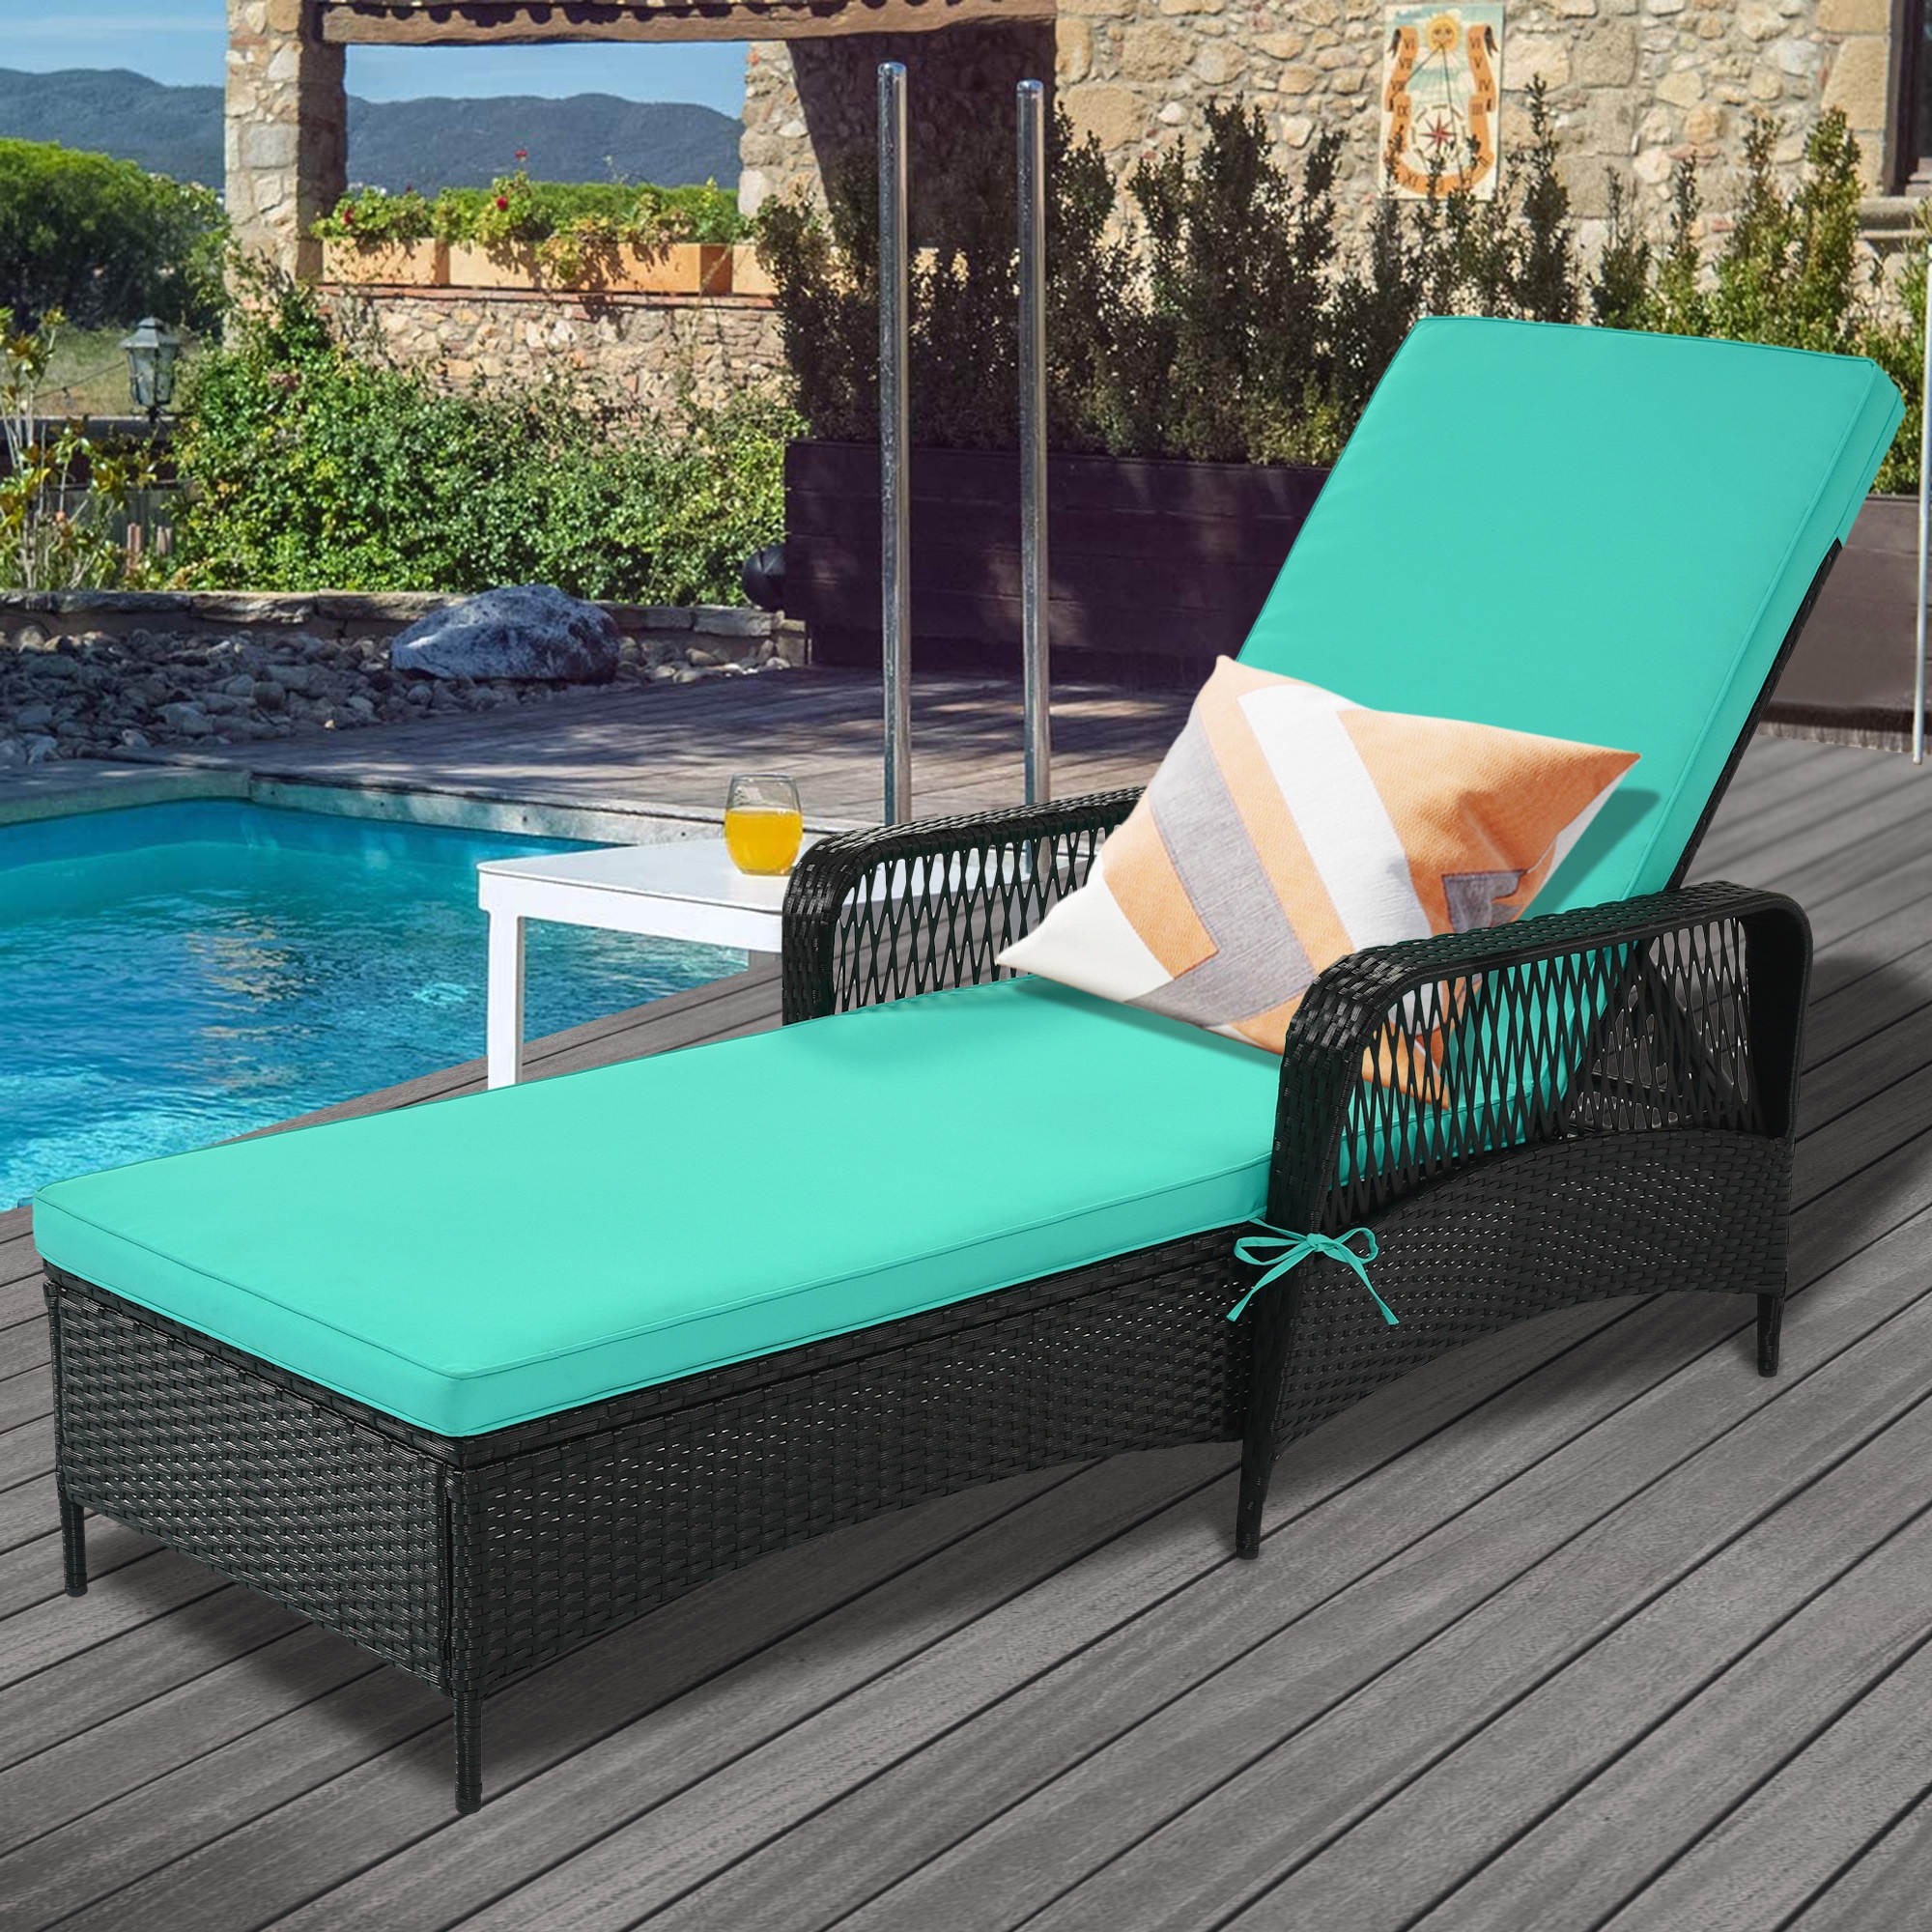 SYNGAR Patio Lounge Chair, Patio Chaise Lounges with Thickened Cushion, PE Rattan Steel Frame Pool Lounge Chair for Patio Backyard Porch Garden Poolside, Green - image 2 of 10